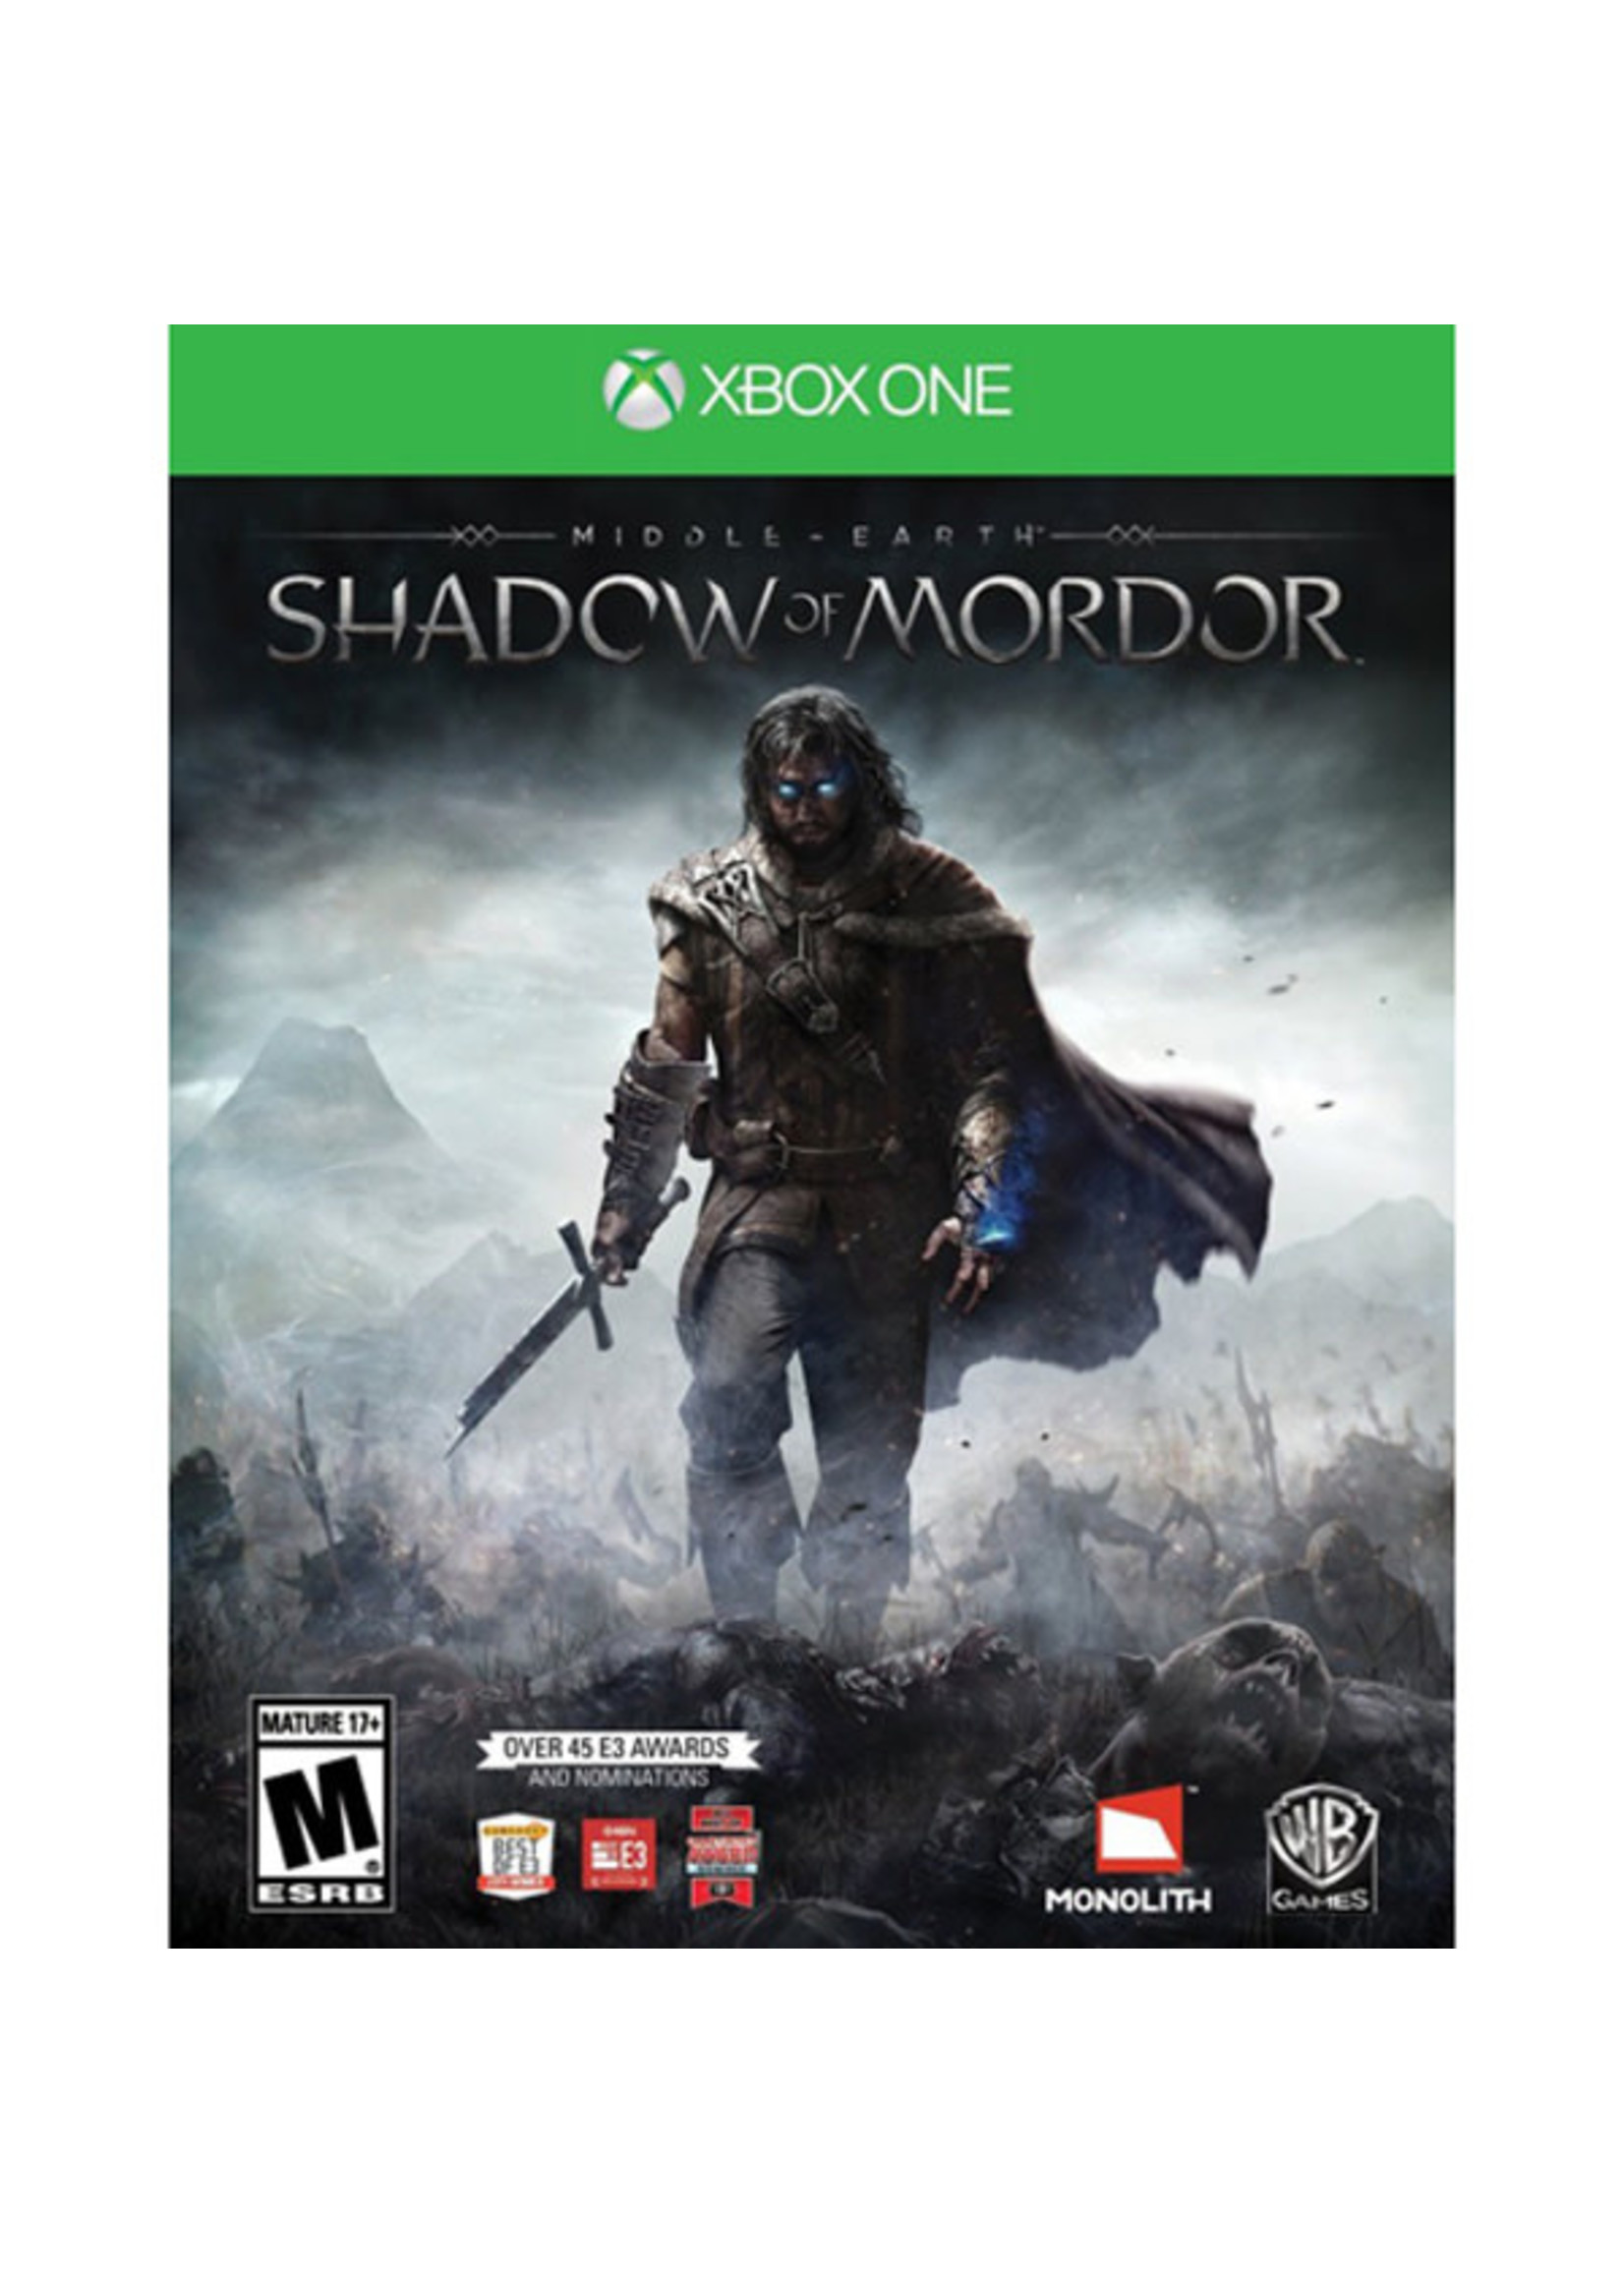 MIDDLE EARTH SHADOW OF MORDOR XBOX ONE (USAGÉ)